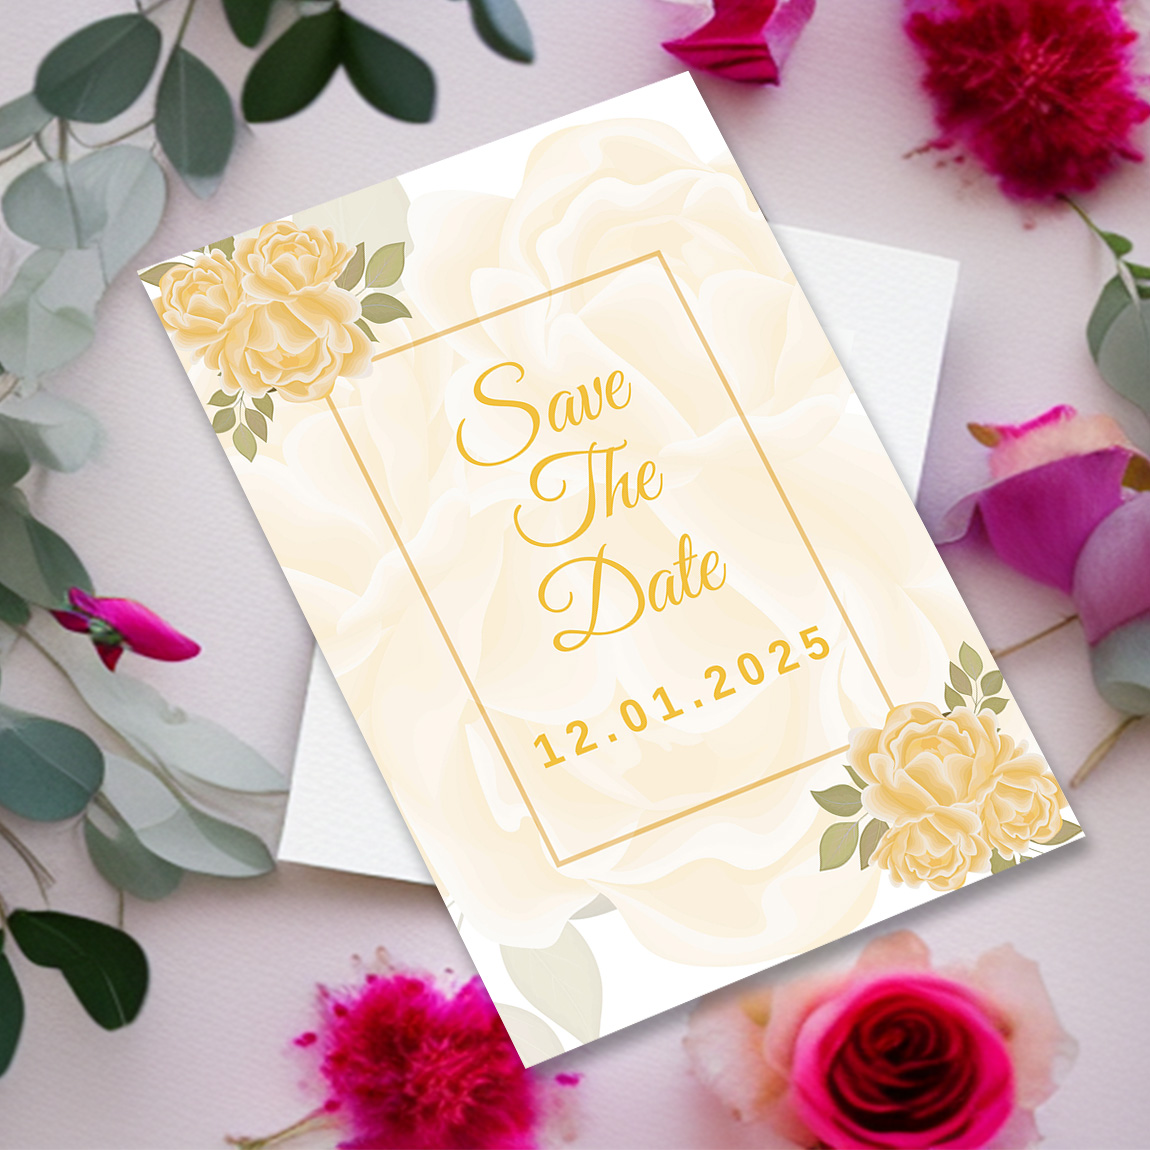 Image with irresistible wedding invitation card in yellow tones and flowers.